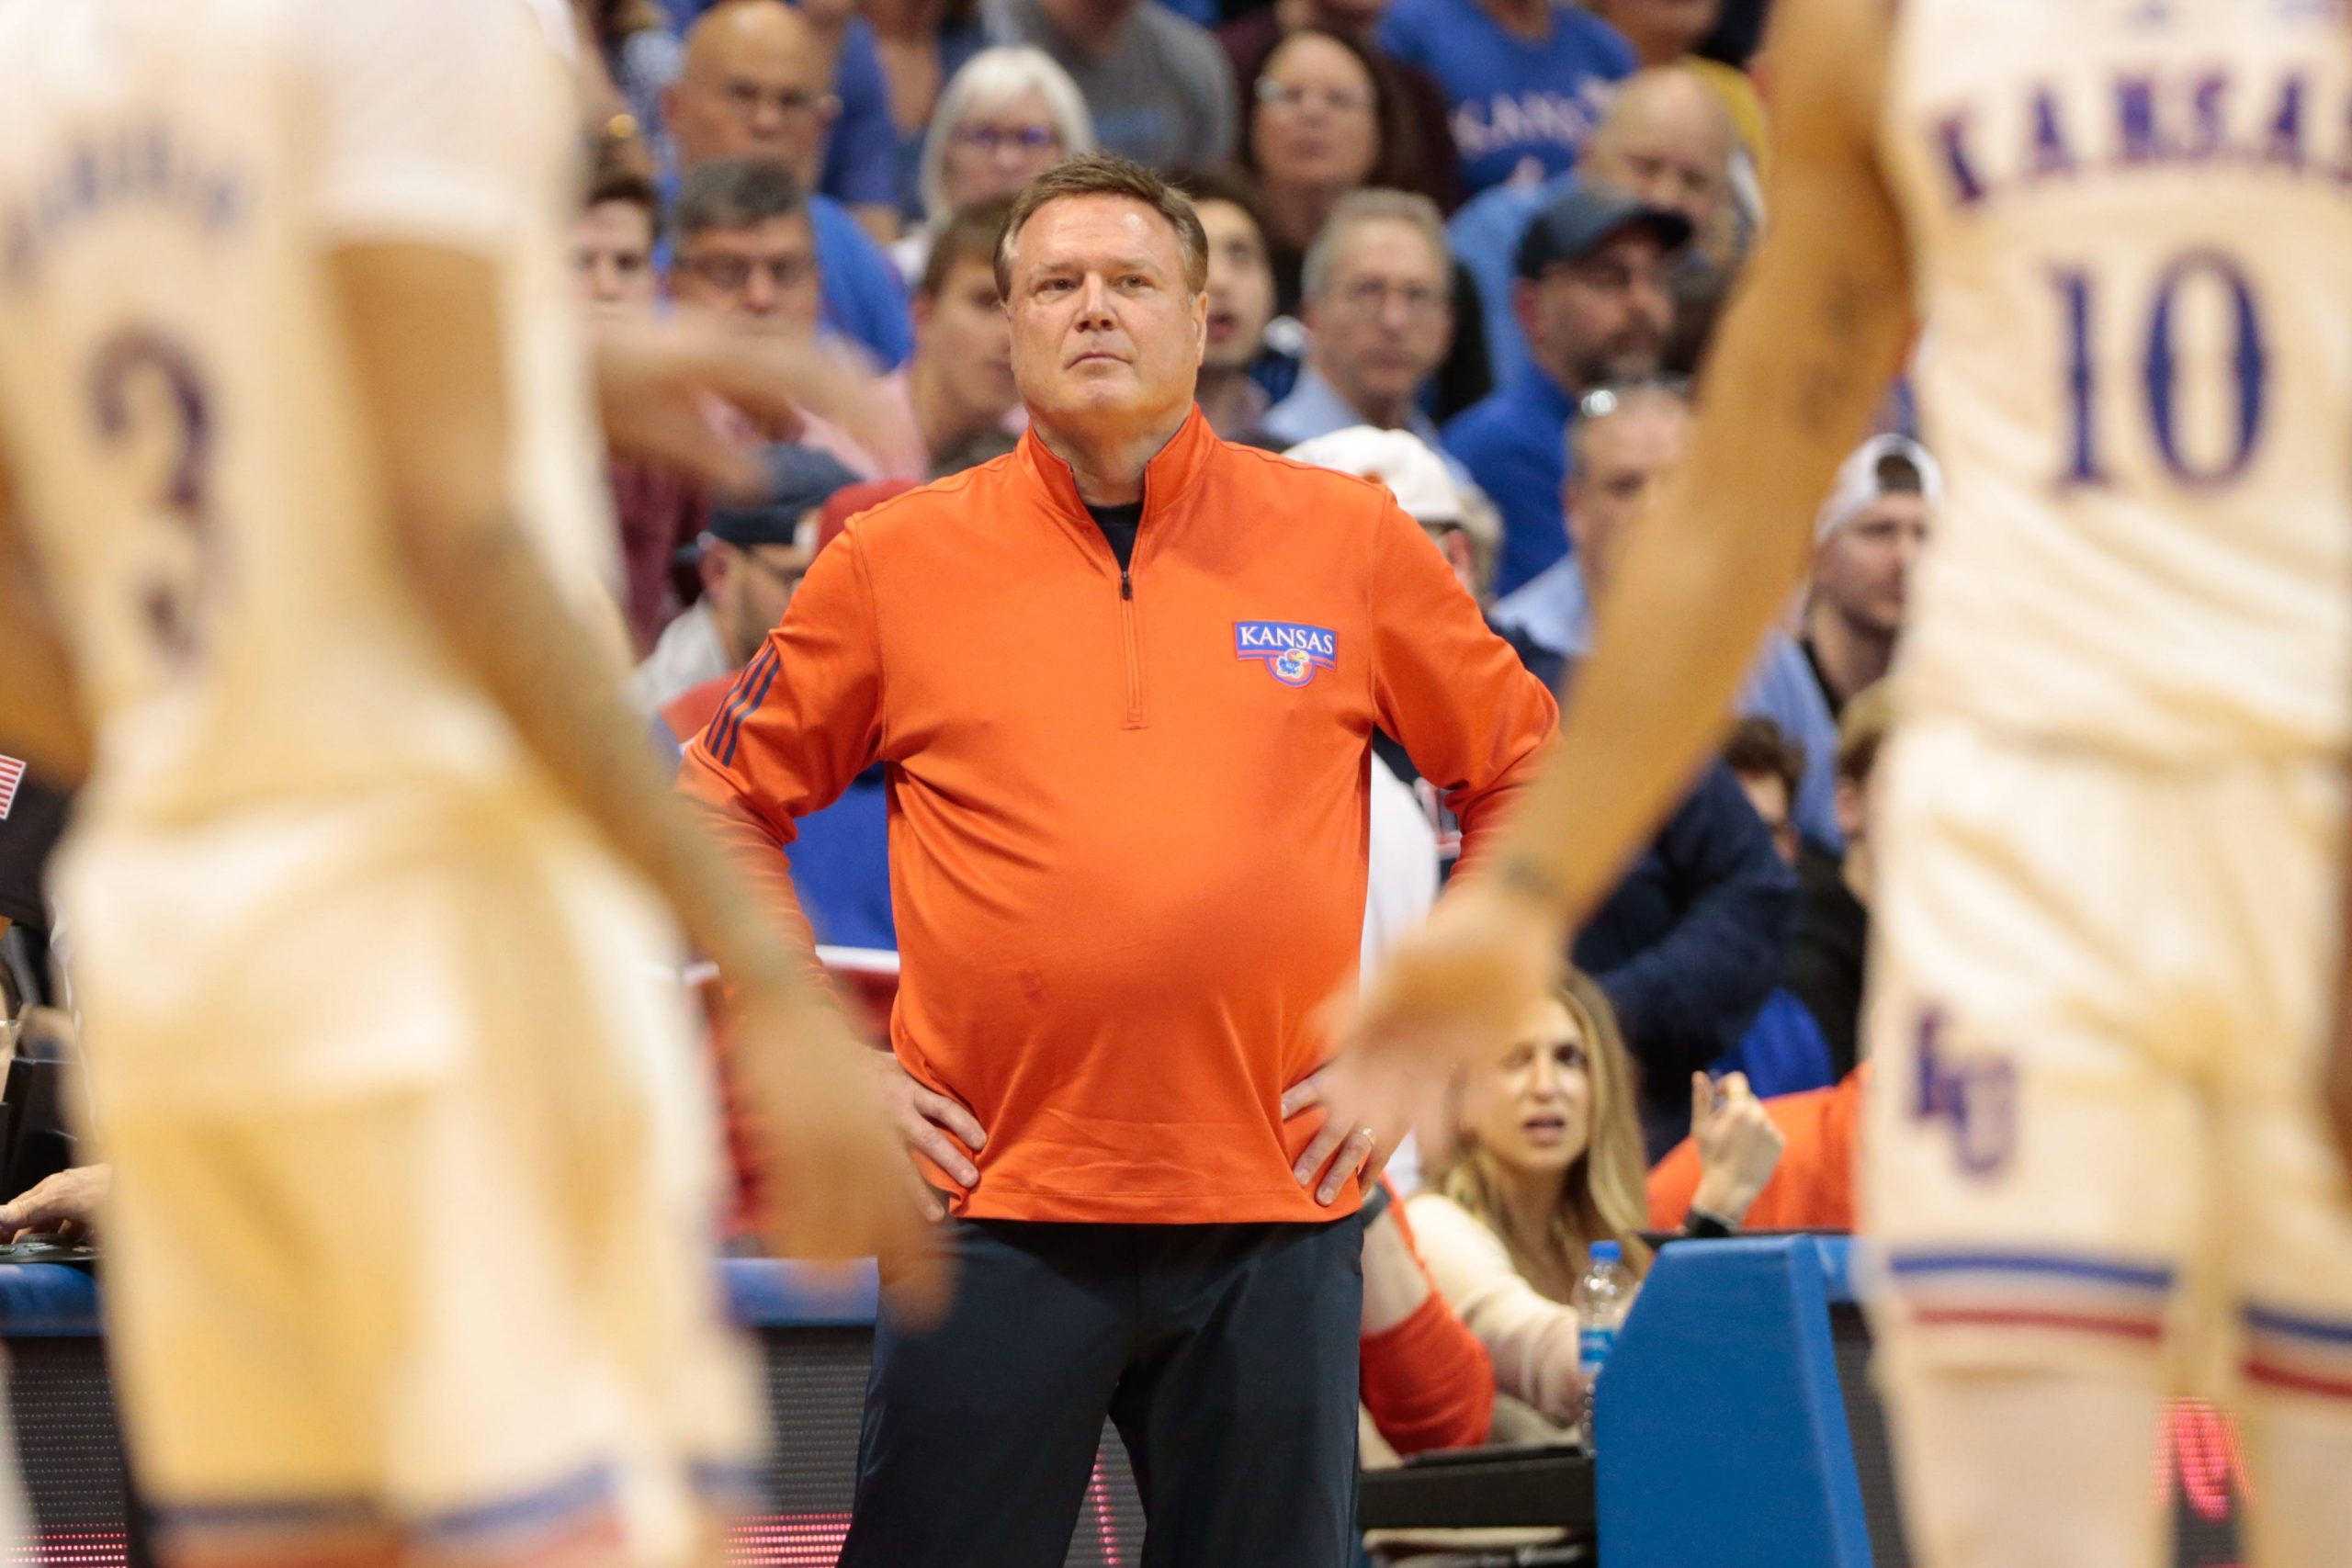 Kansas coach Bill Self looks towards his players during the first half of Saturday's game against Texas inside Allen Fieldhouse